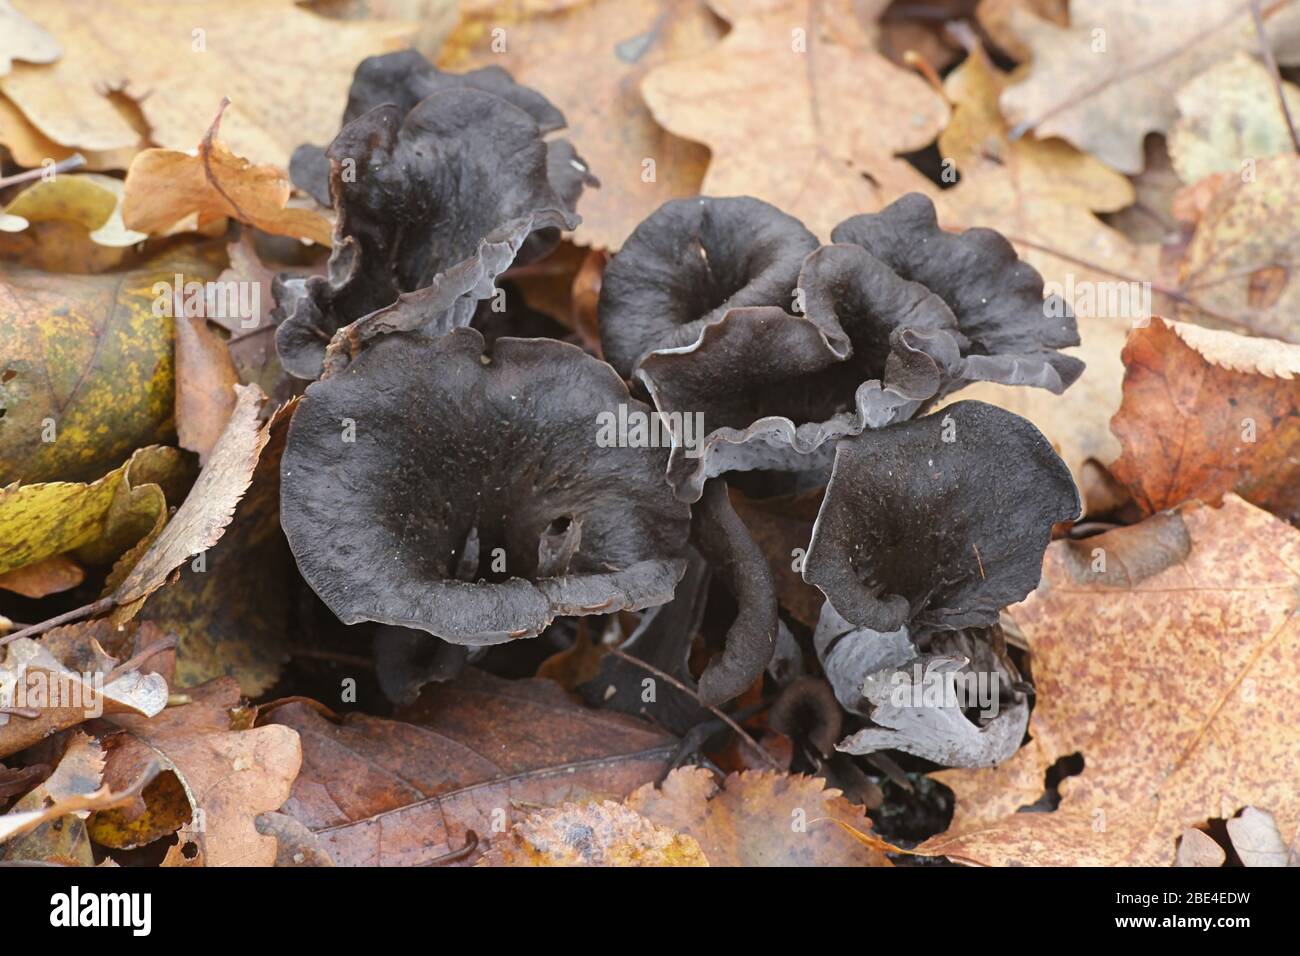 Craterellus cornucopioides, commonly known as the Horn of plenty, black chanterelle  or trumpet of the dead, a delicious wild mushroom from Finland Stock Photo